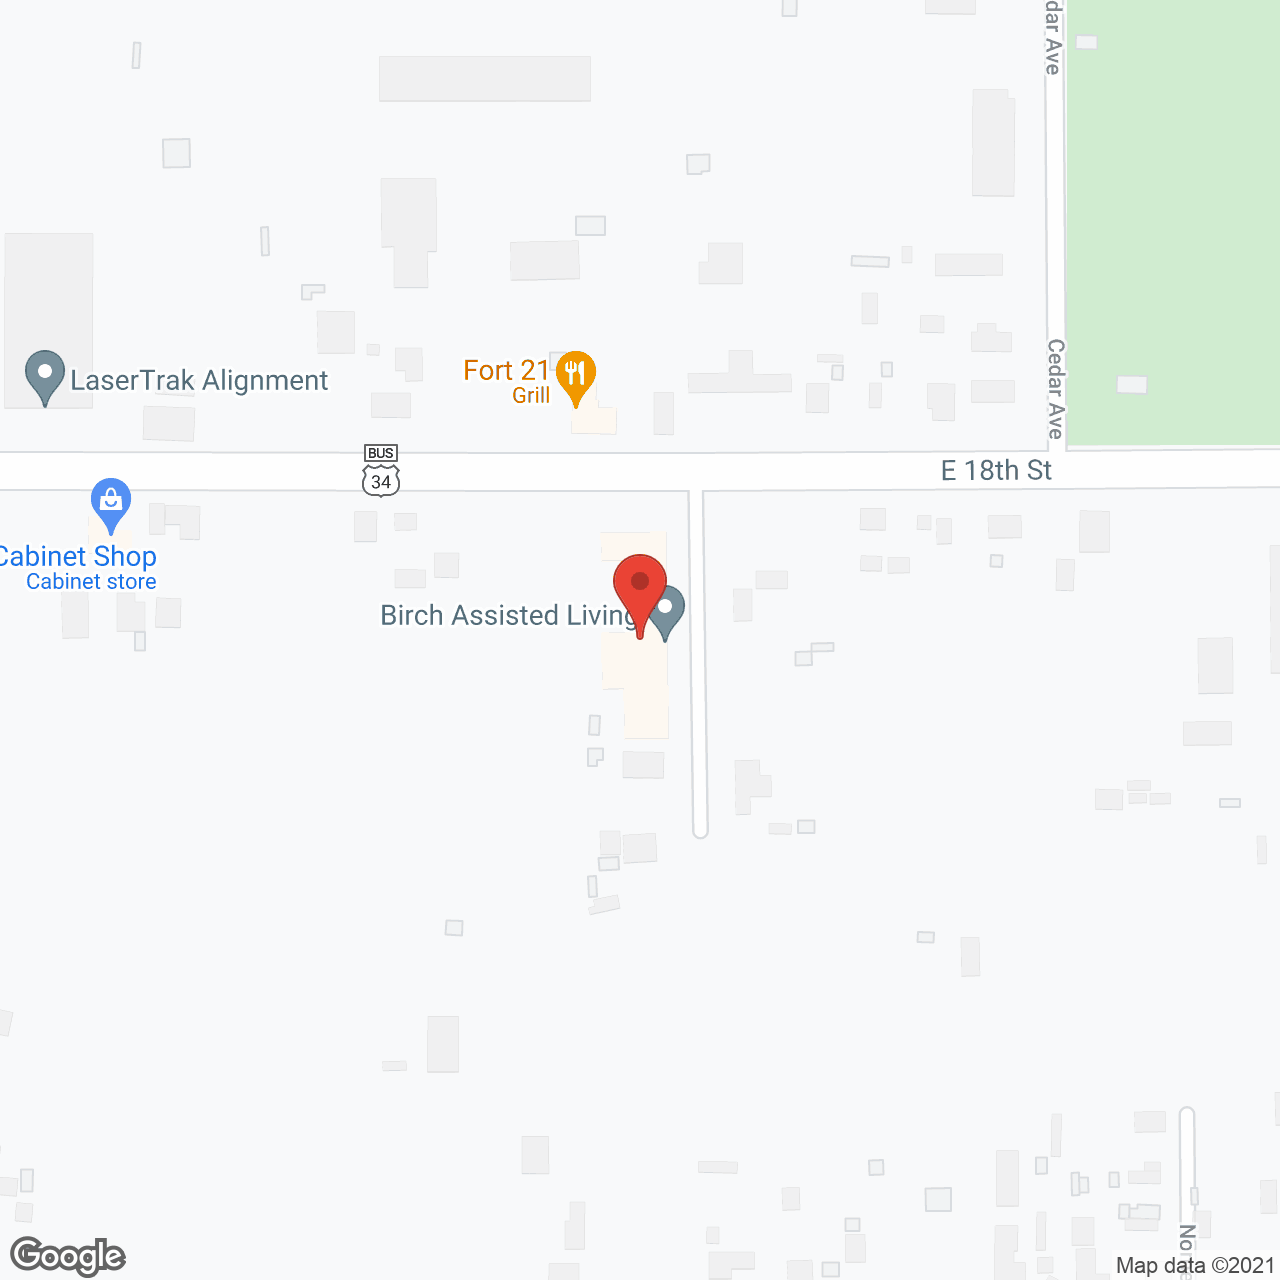 Birch Assisted Living in google map